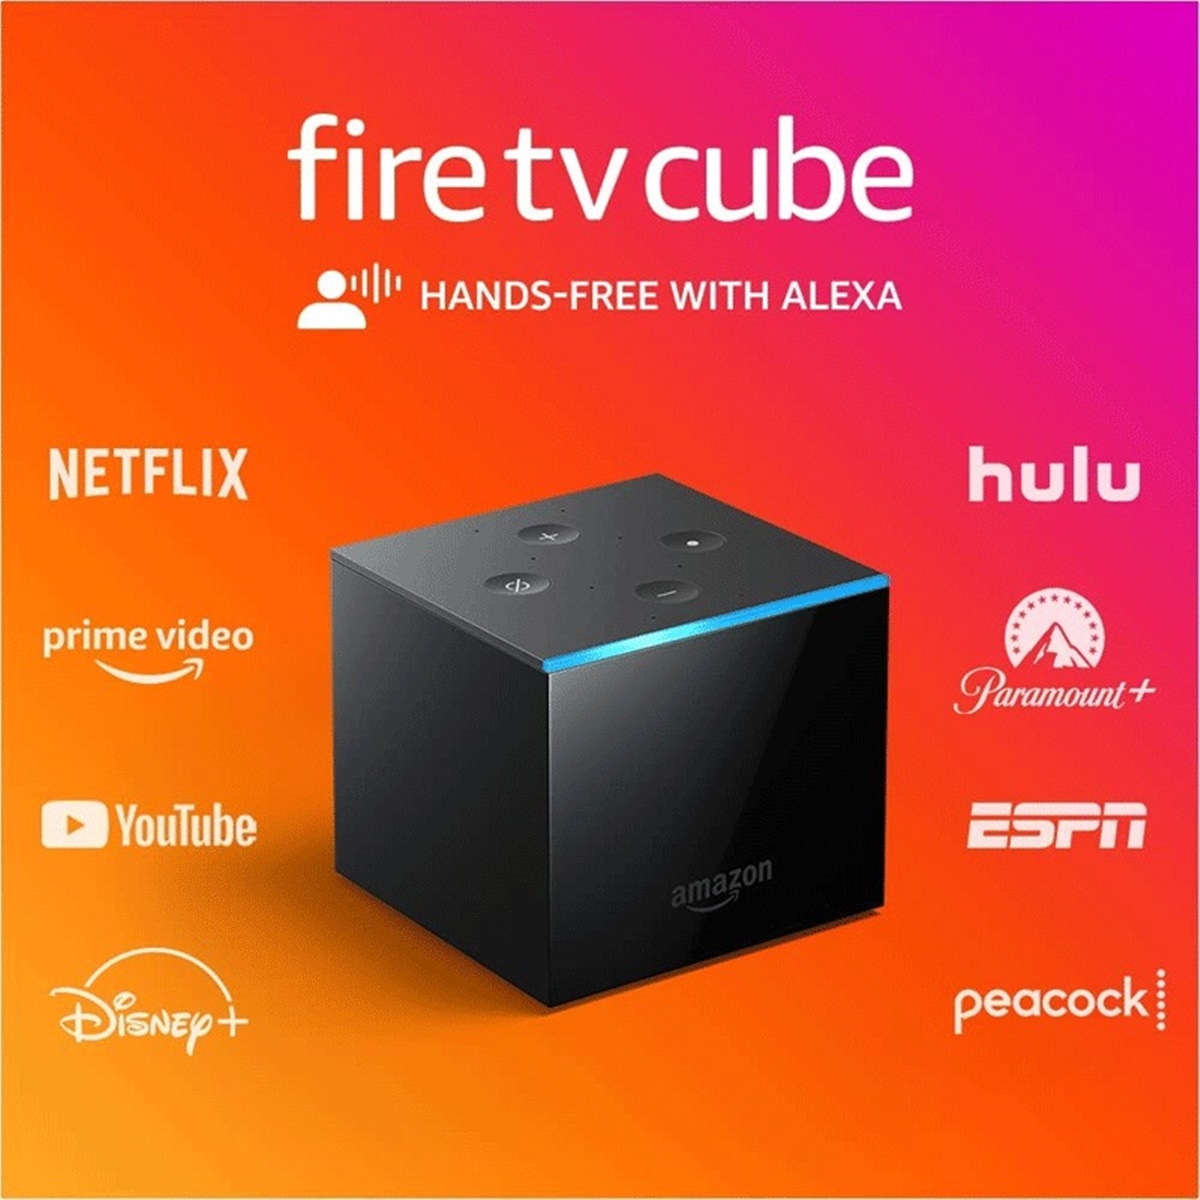 Amazon Fire TV Cube: What It Is And How It Works